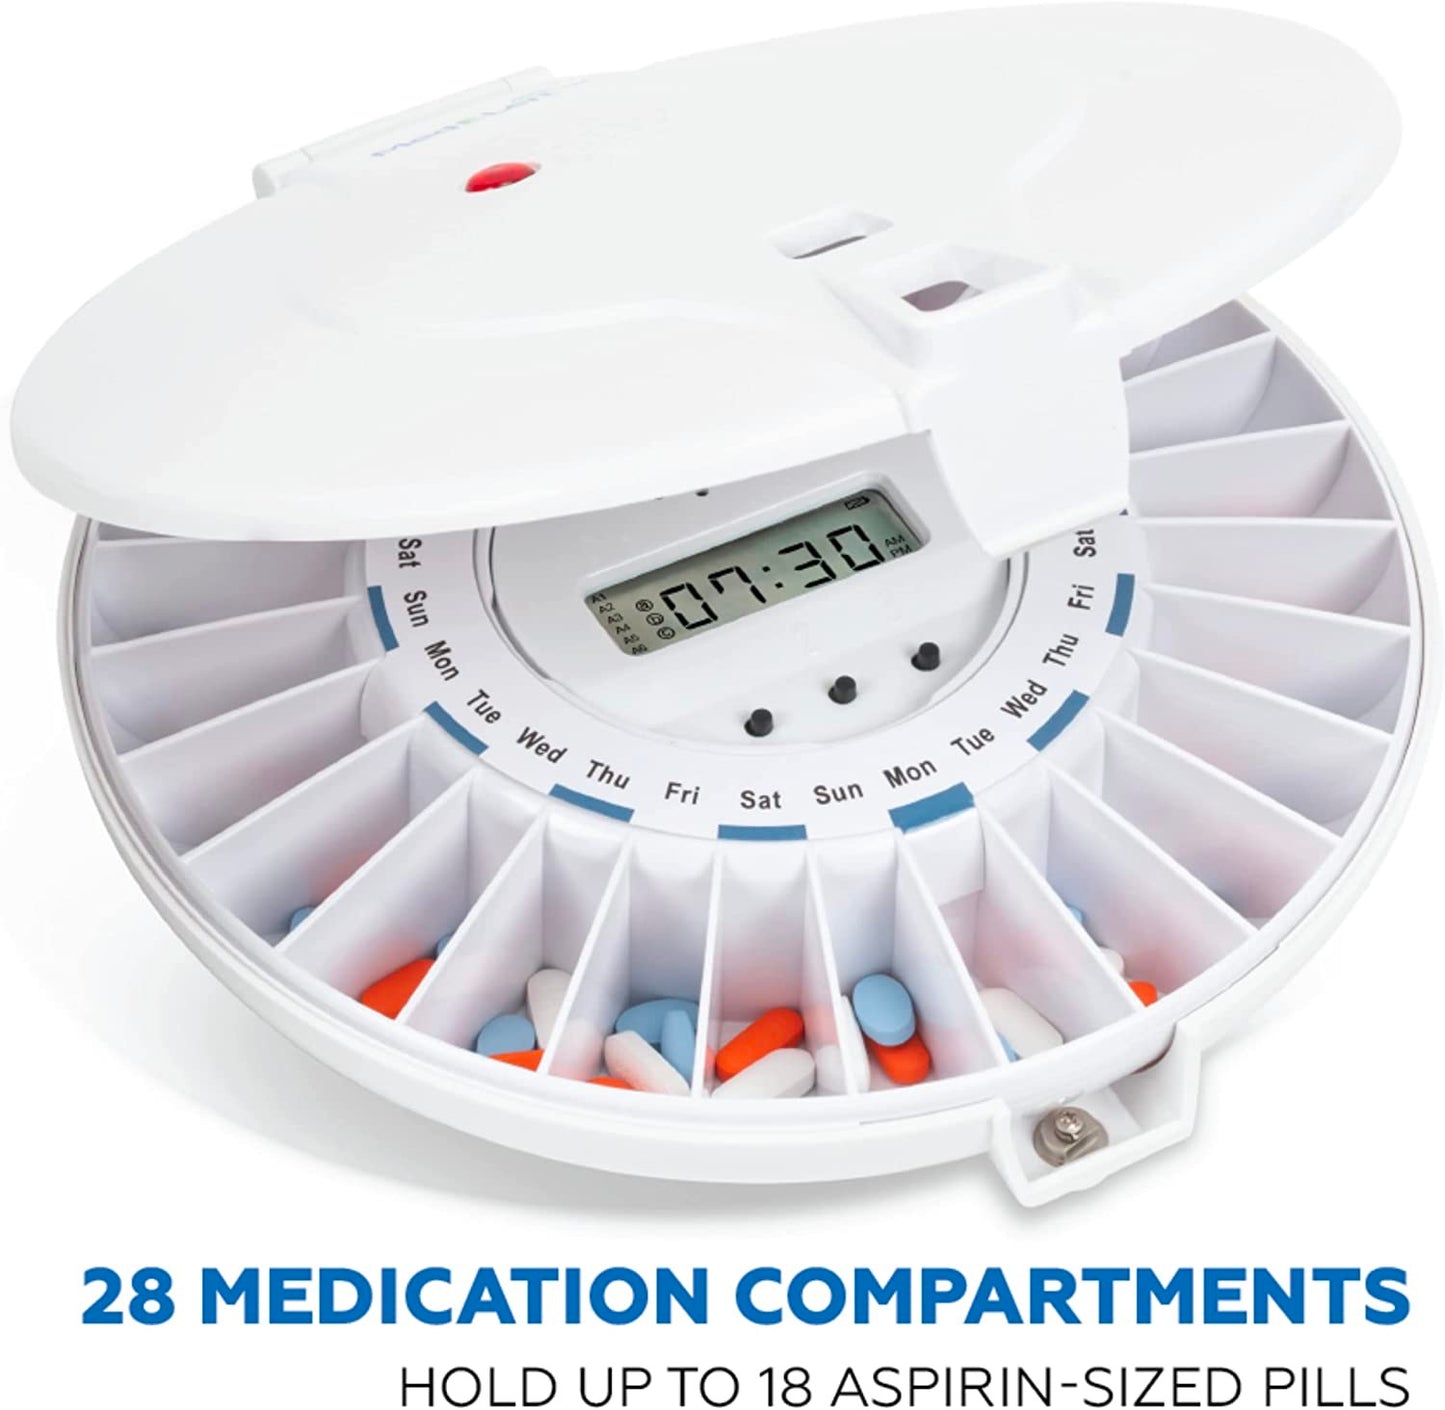 automatic pill dispenser partially open demonstrating 28 medication compartments